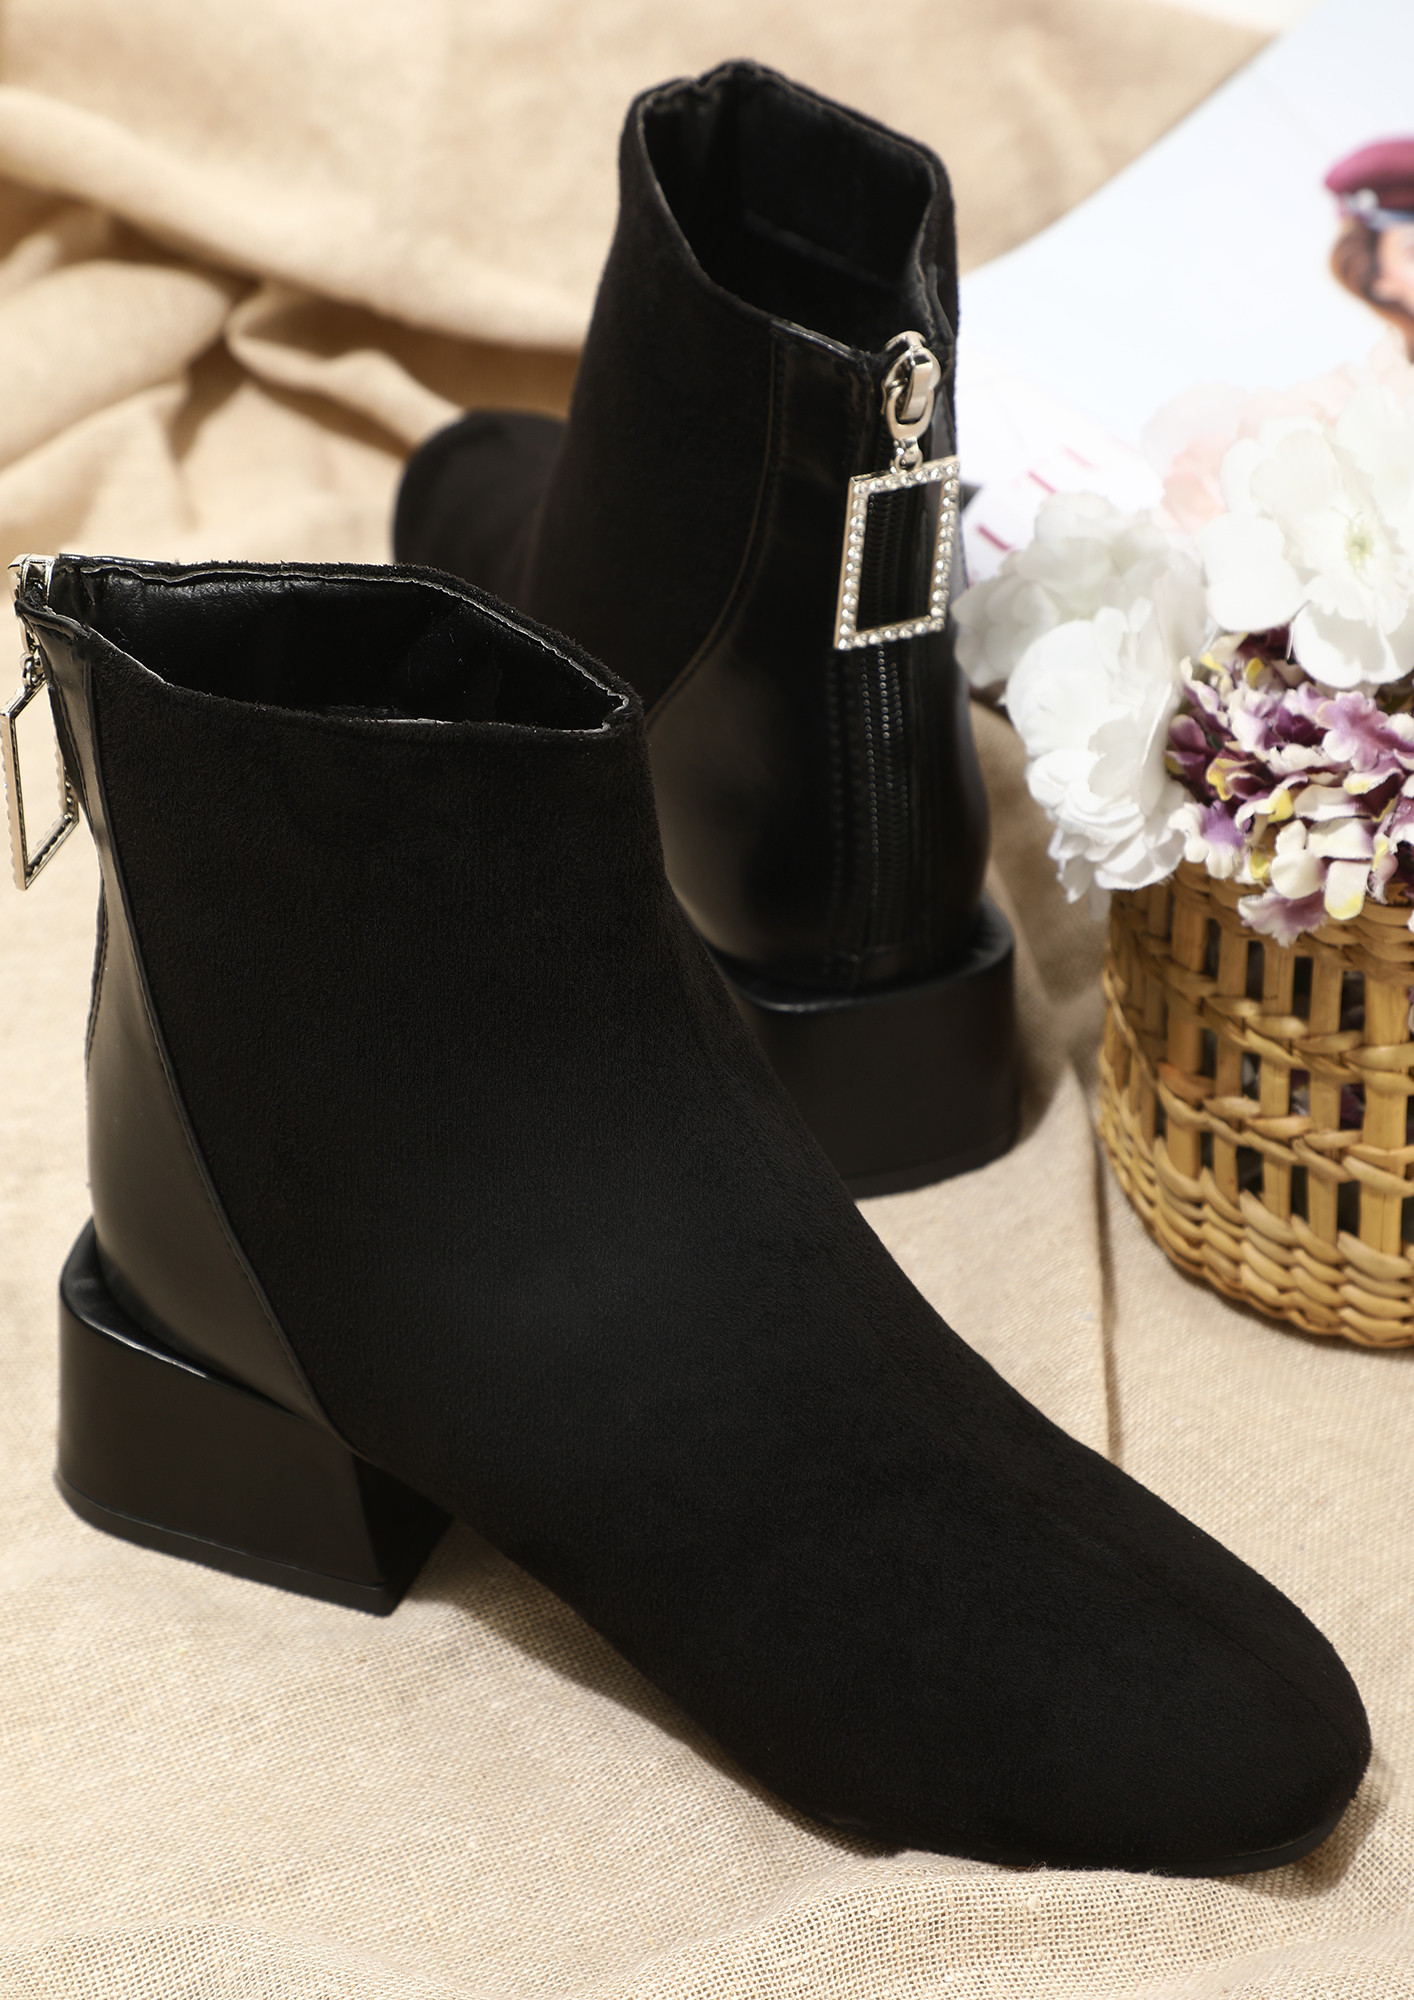  HINT OF SOPHISTICATION BLACK BOOTS